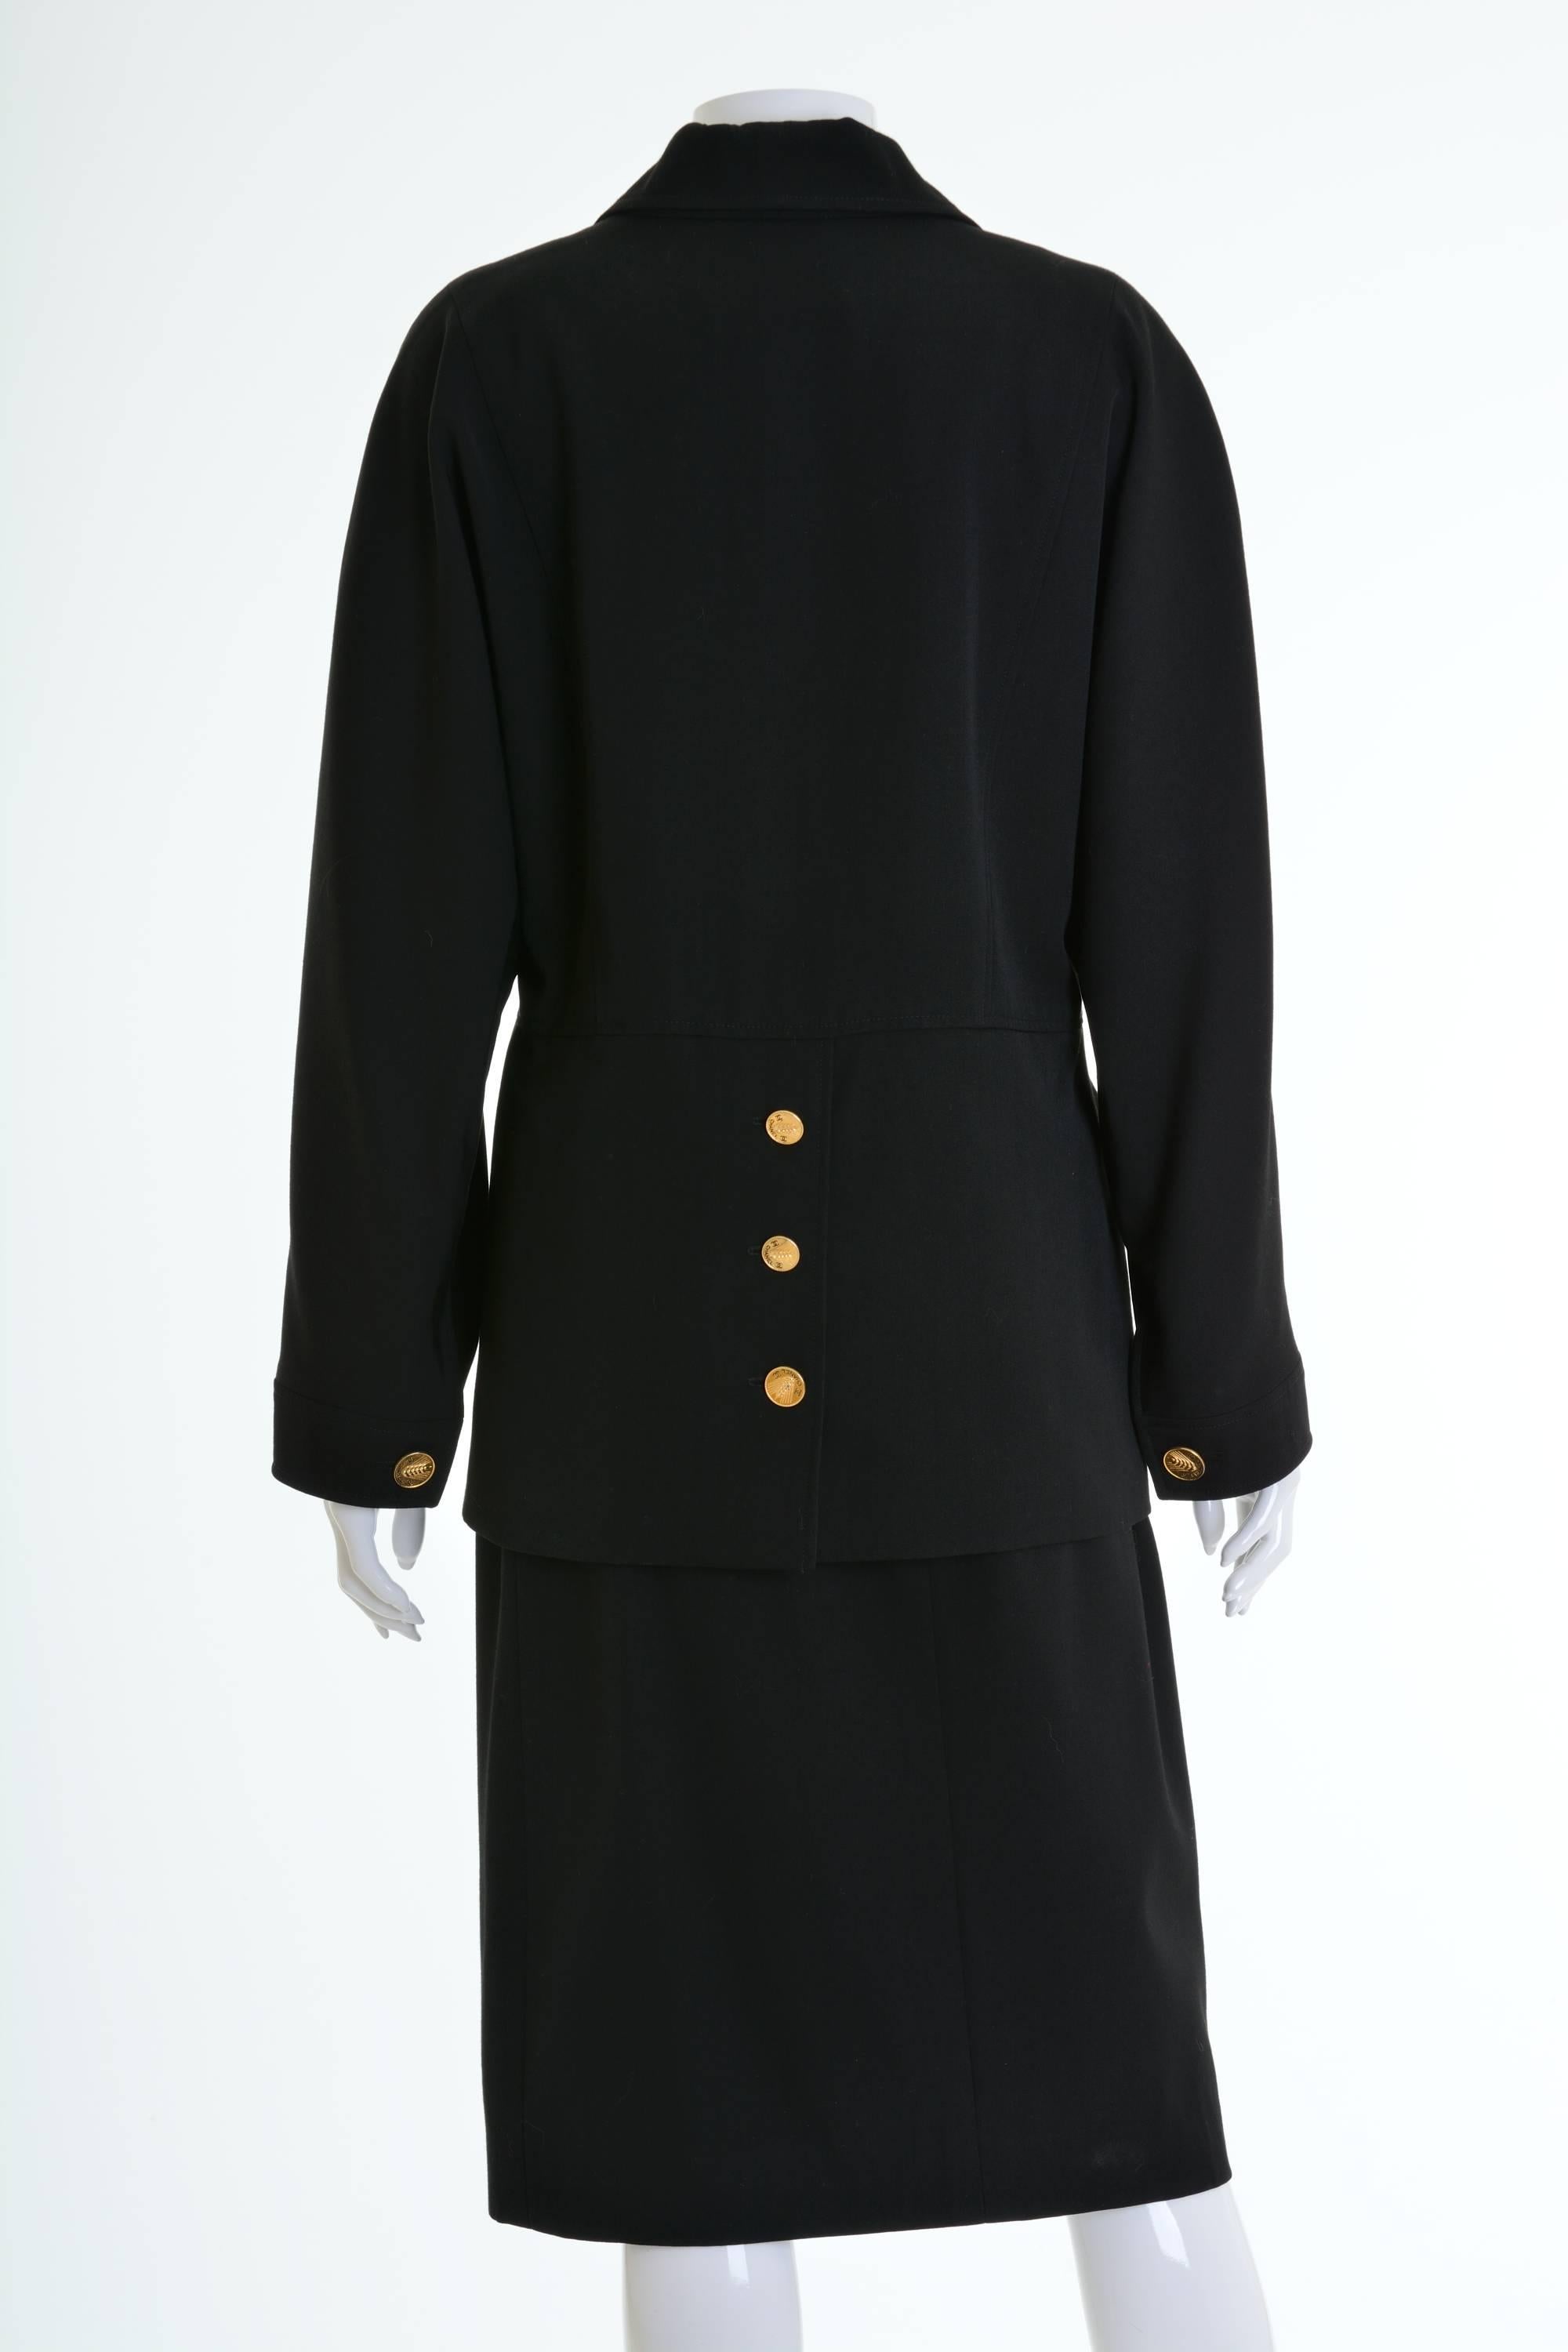 This lovely and authentic Chanel suit dress is in a black wool gabardine fabric. The jacket has oversize line,dolman sleeves,  two front flap pockets, double breasted closure with CC logo golden metal buttons and on the back slit. The pencil skirt